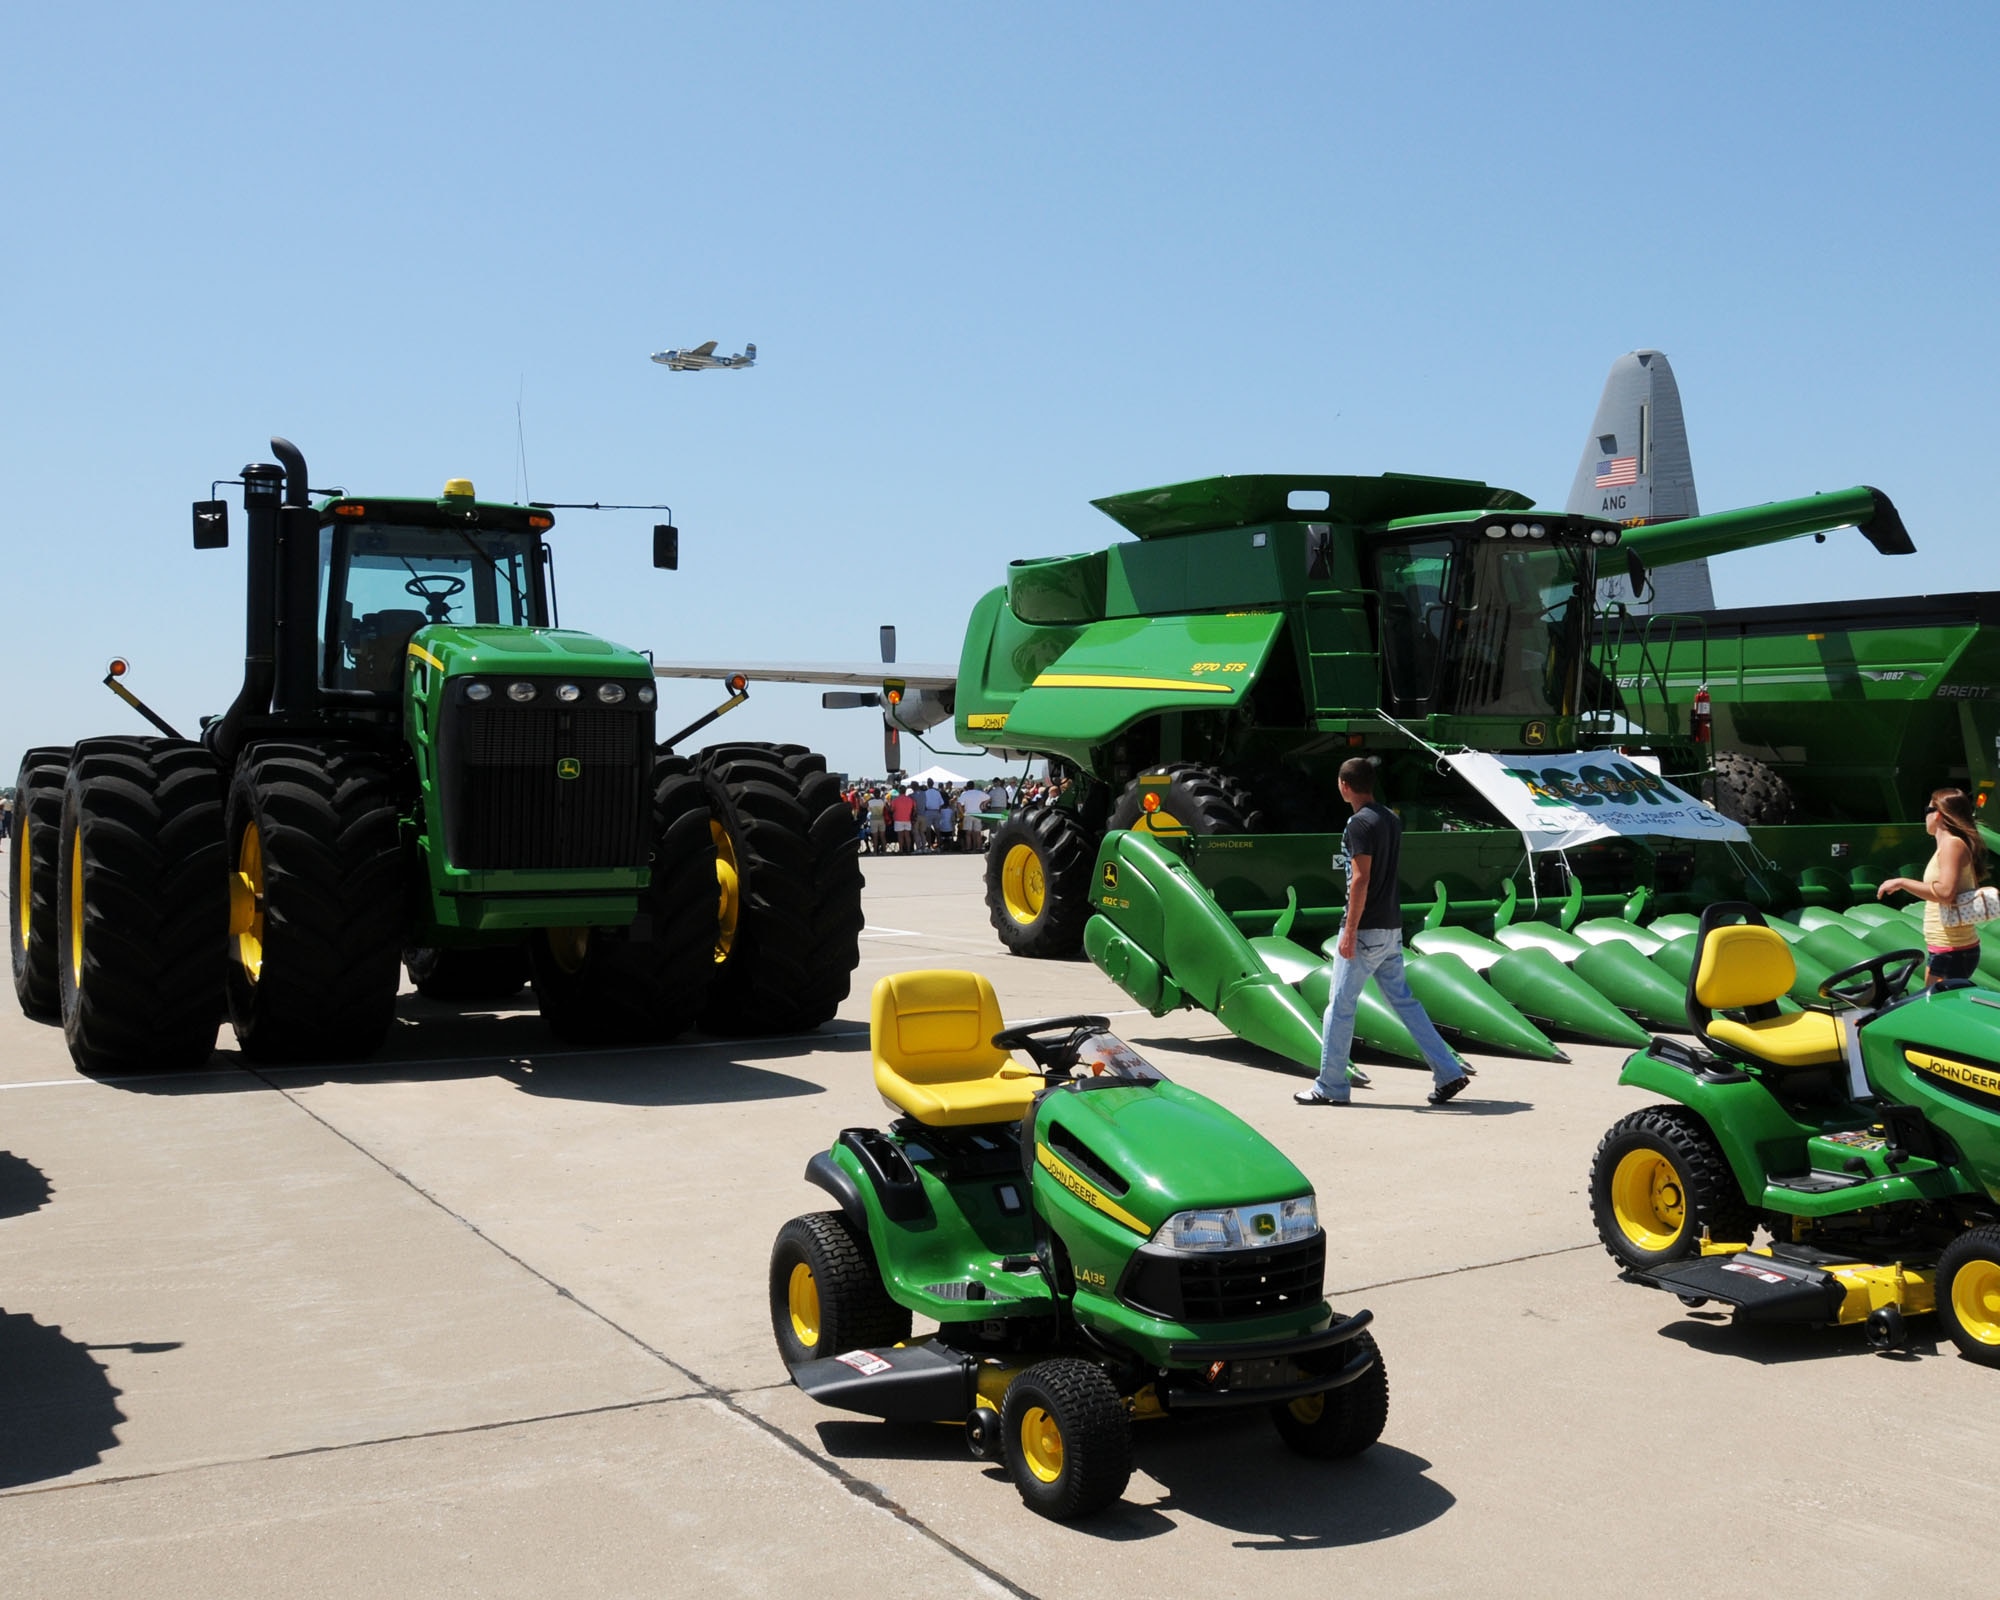 Combines and tractors of all sizes were on display beside various aircraft filling the ramp at the Sioux Gateway Airport / Col. Bud Day Field, in Sioux City, Iowa, as a B25 flies overhead.  This was all a part of the unique Air & Ag Expo hosted by the 185th Air Refueling Wing.
Official Air Force Photo by: MSgt. Bill Wiseman (released)